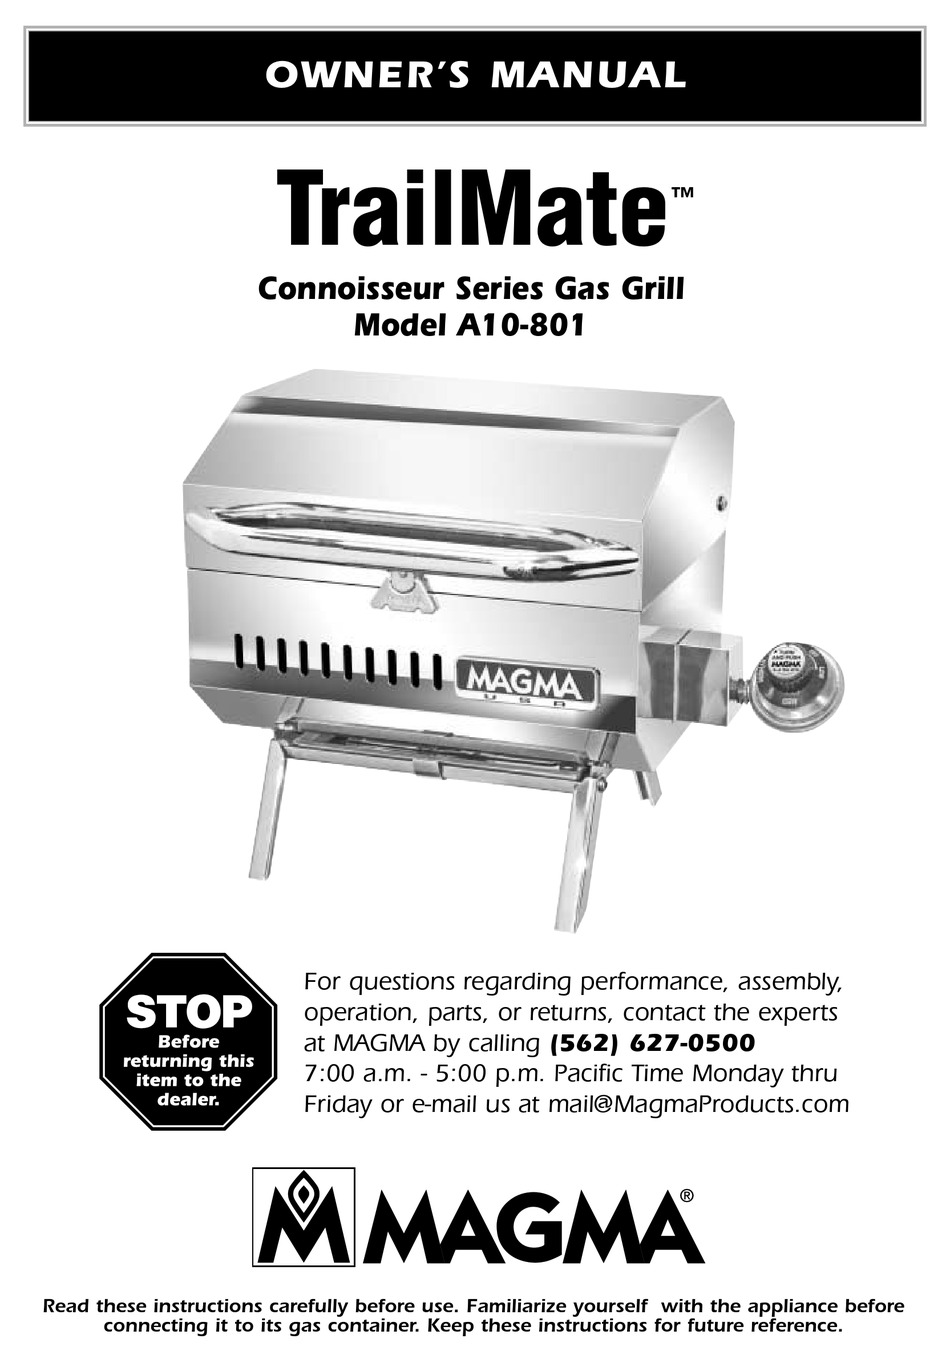 MAGMA CONNOISSEUR SERIES TRAILMATE GAS GRILL 